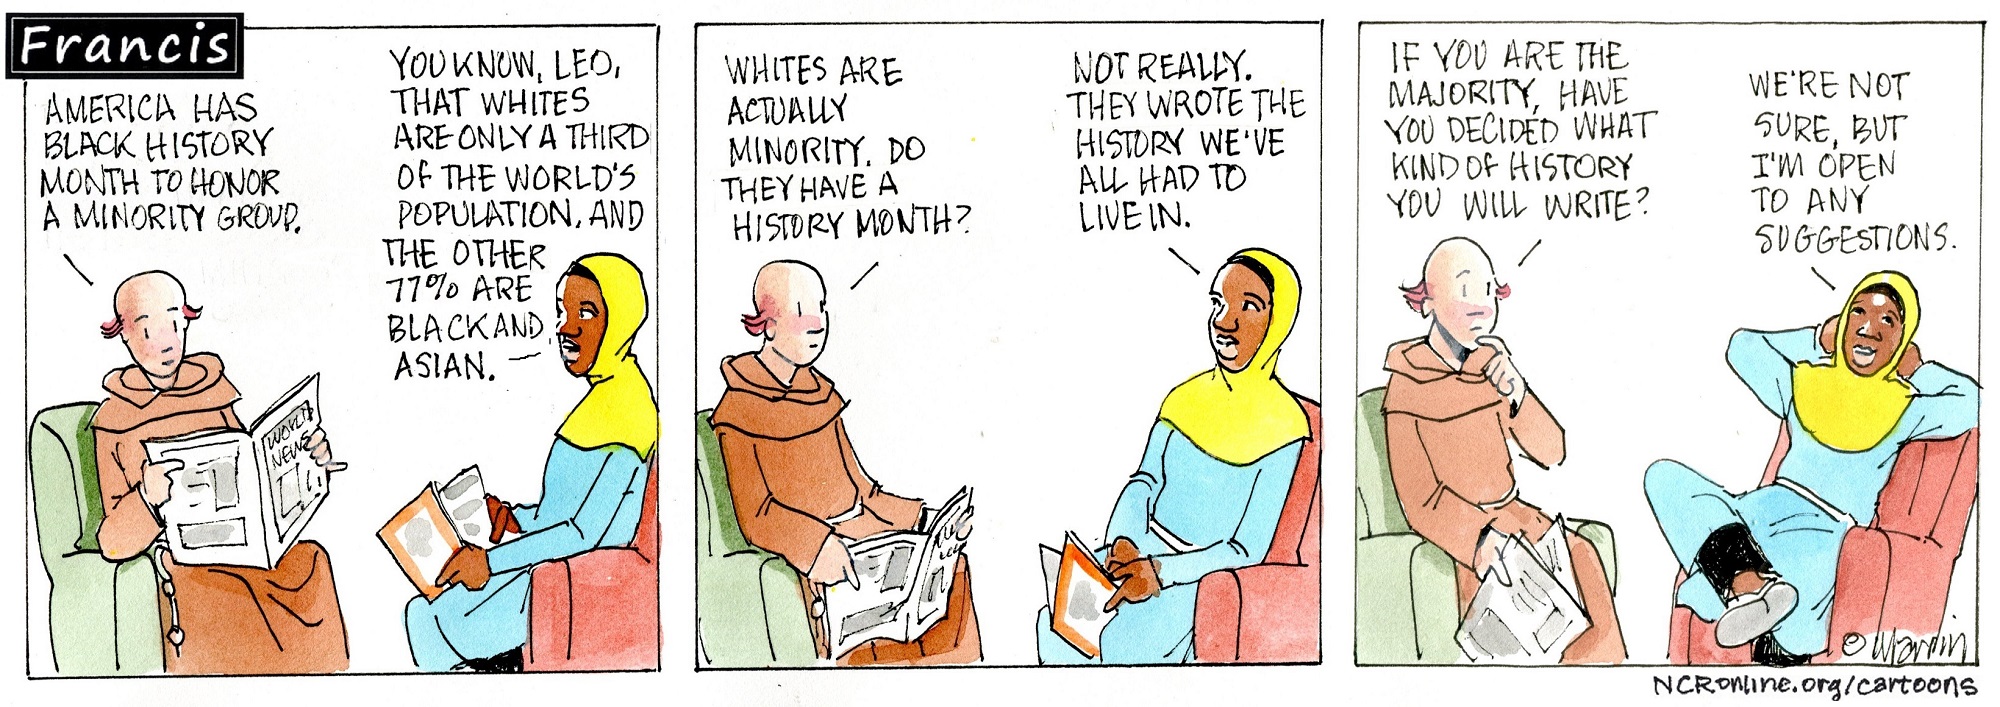 Francis, the comic strip: Brother Leo and Gabby discuss how to rewrite history.